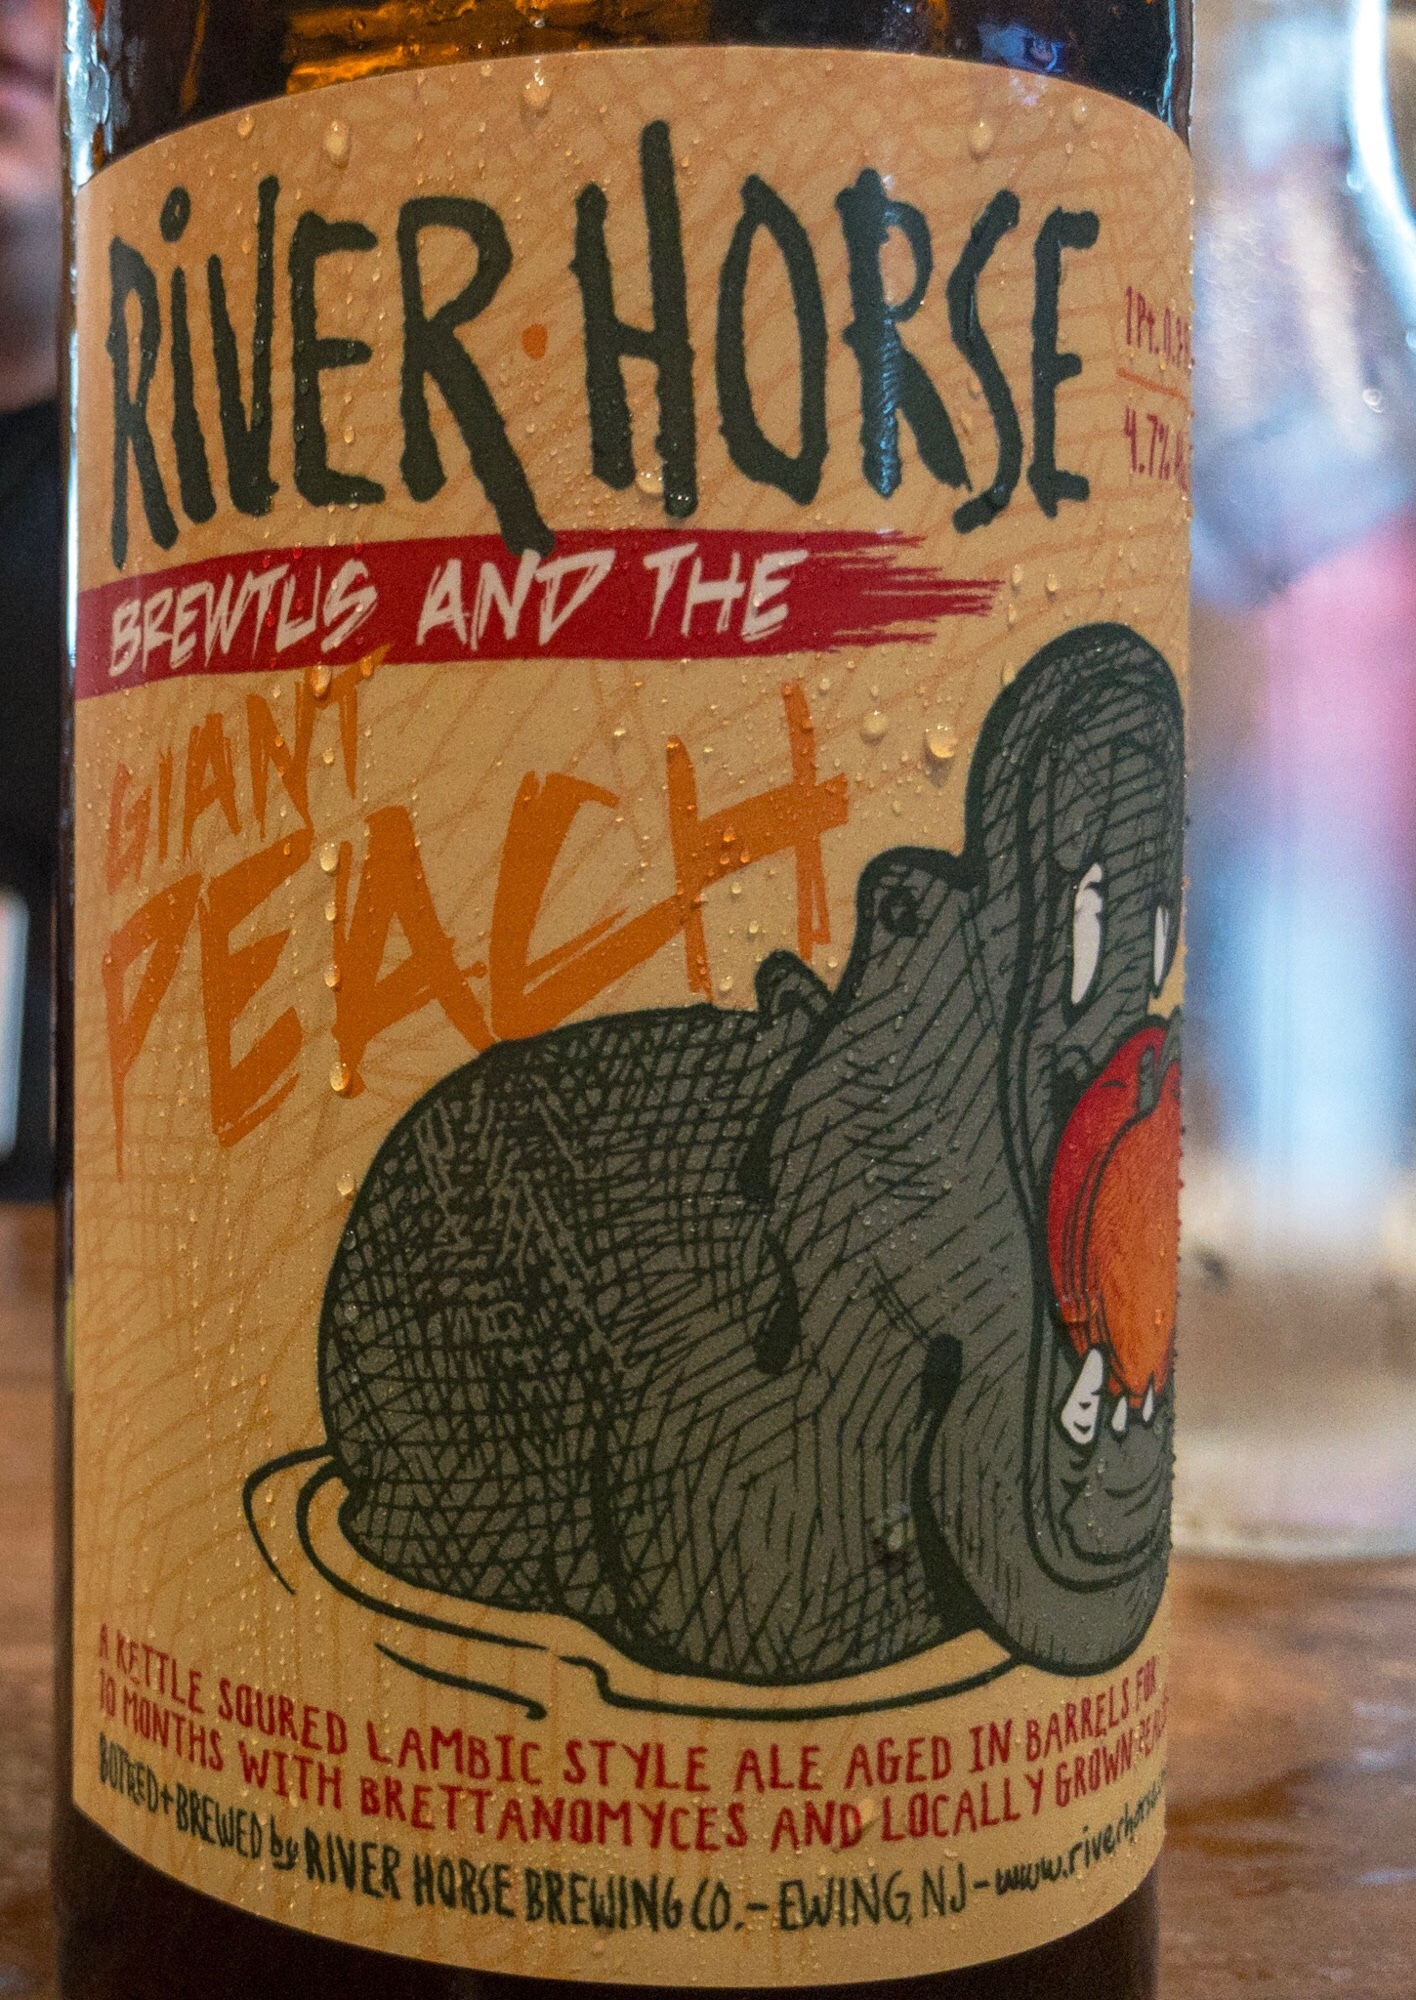 River Horse Brewing Co. Brewtus and the Giant Peach